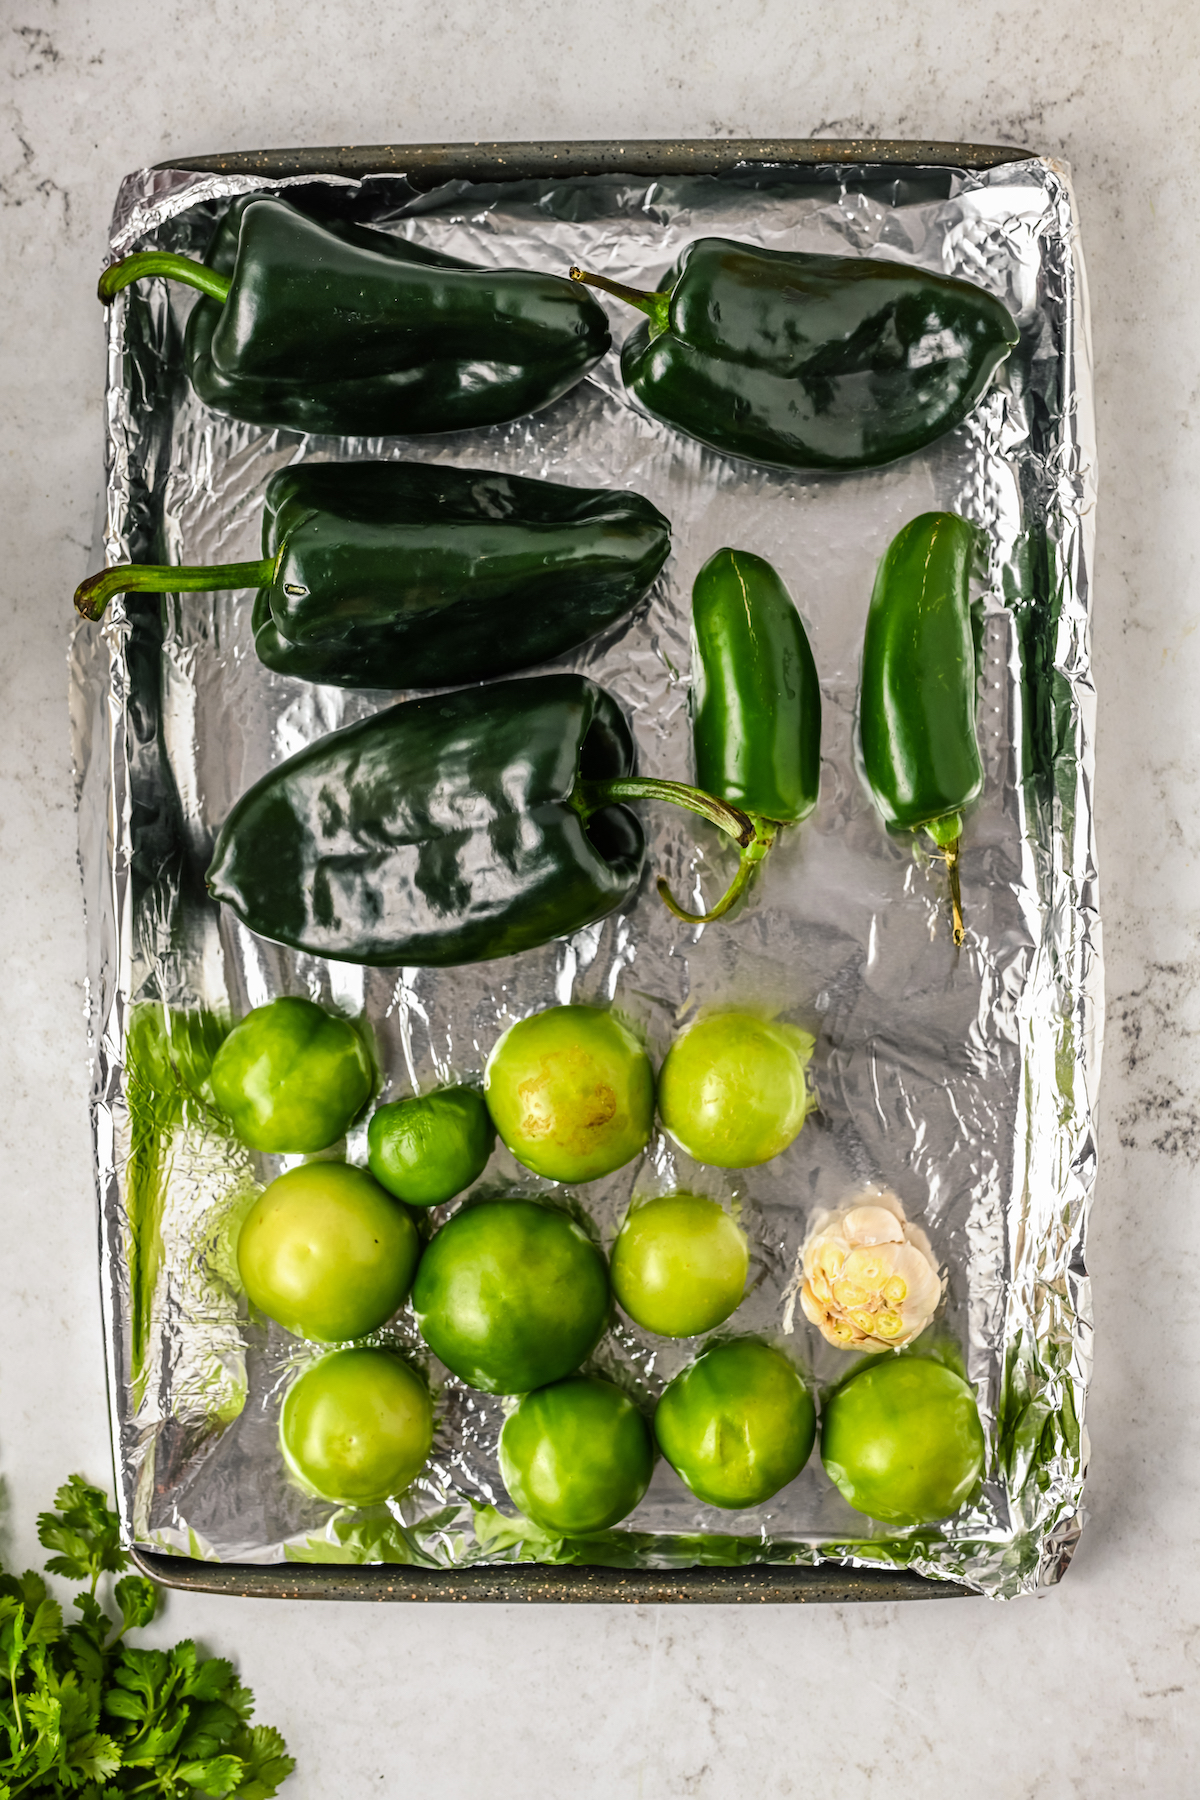 Poblanos, tomatillos, and jalapeños in a foil-lined tray.